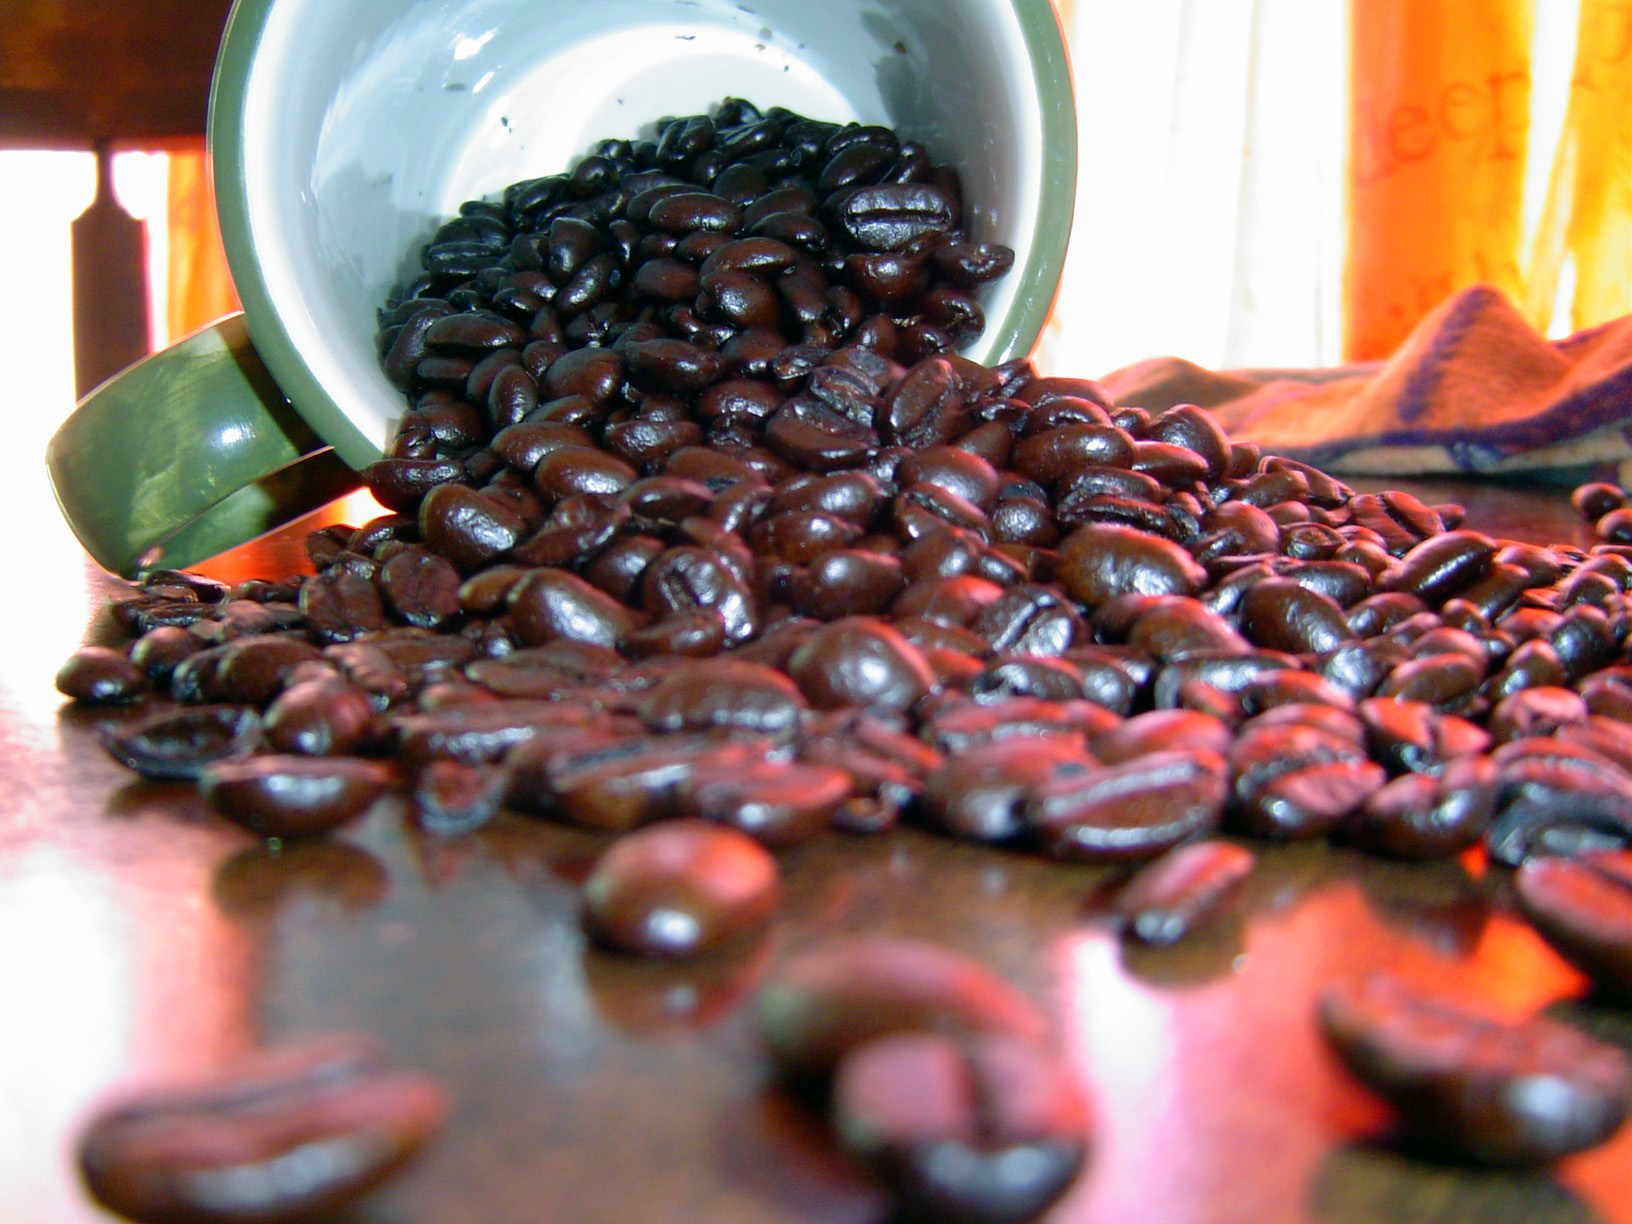 Spill the beans. Coffee left. Spilling the Beans. Spill. The Beans pics.